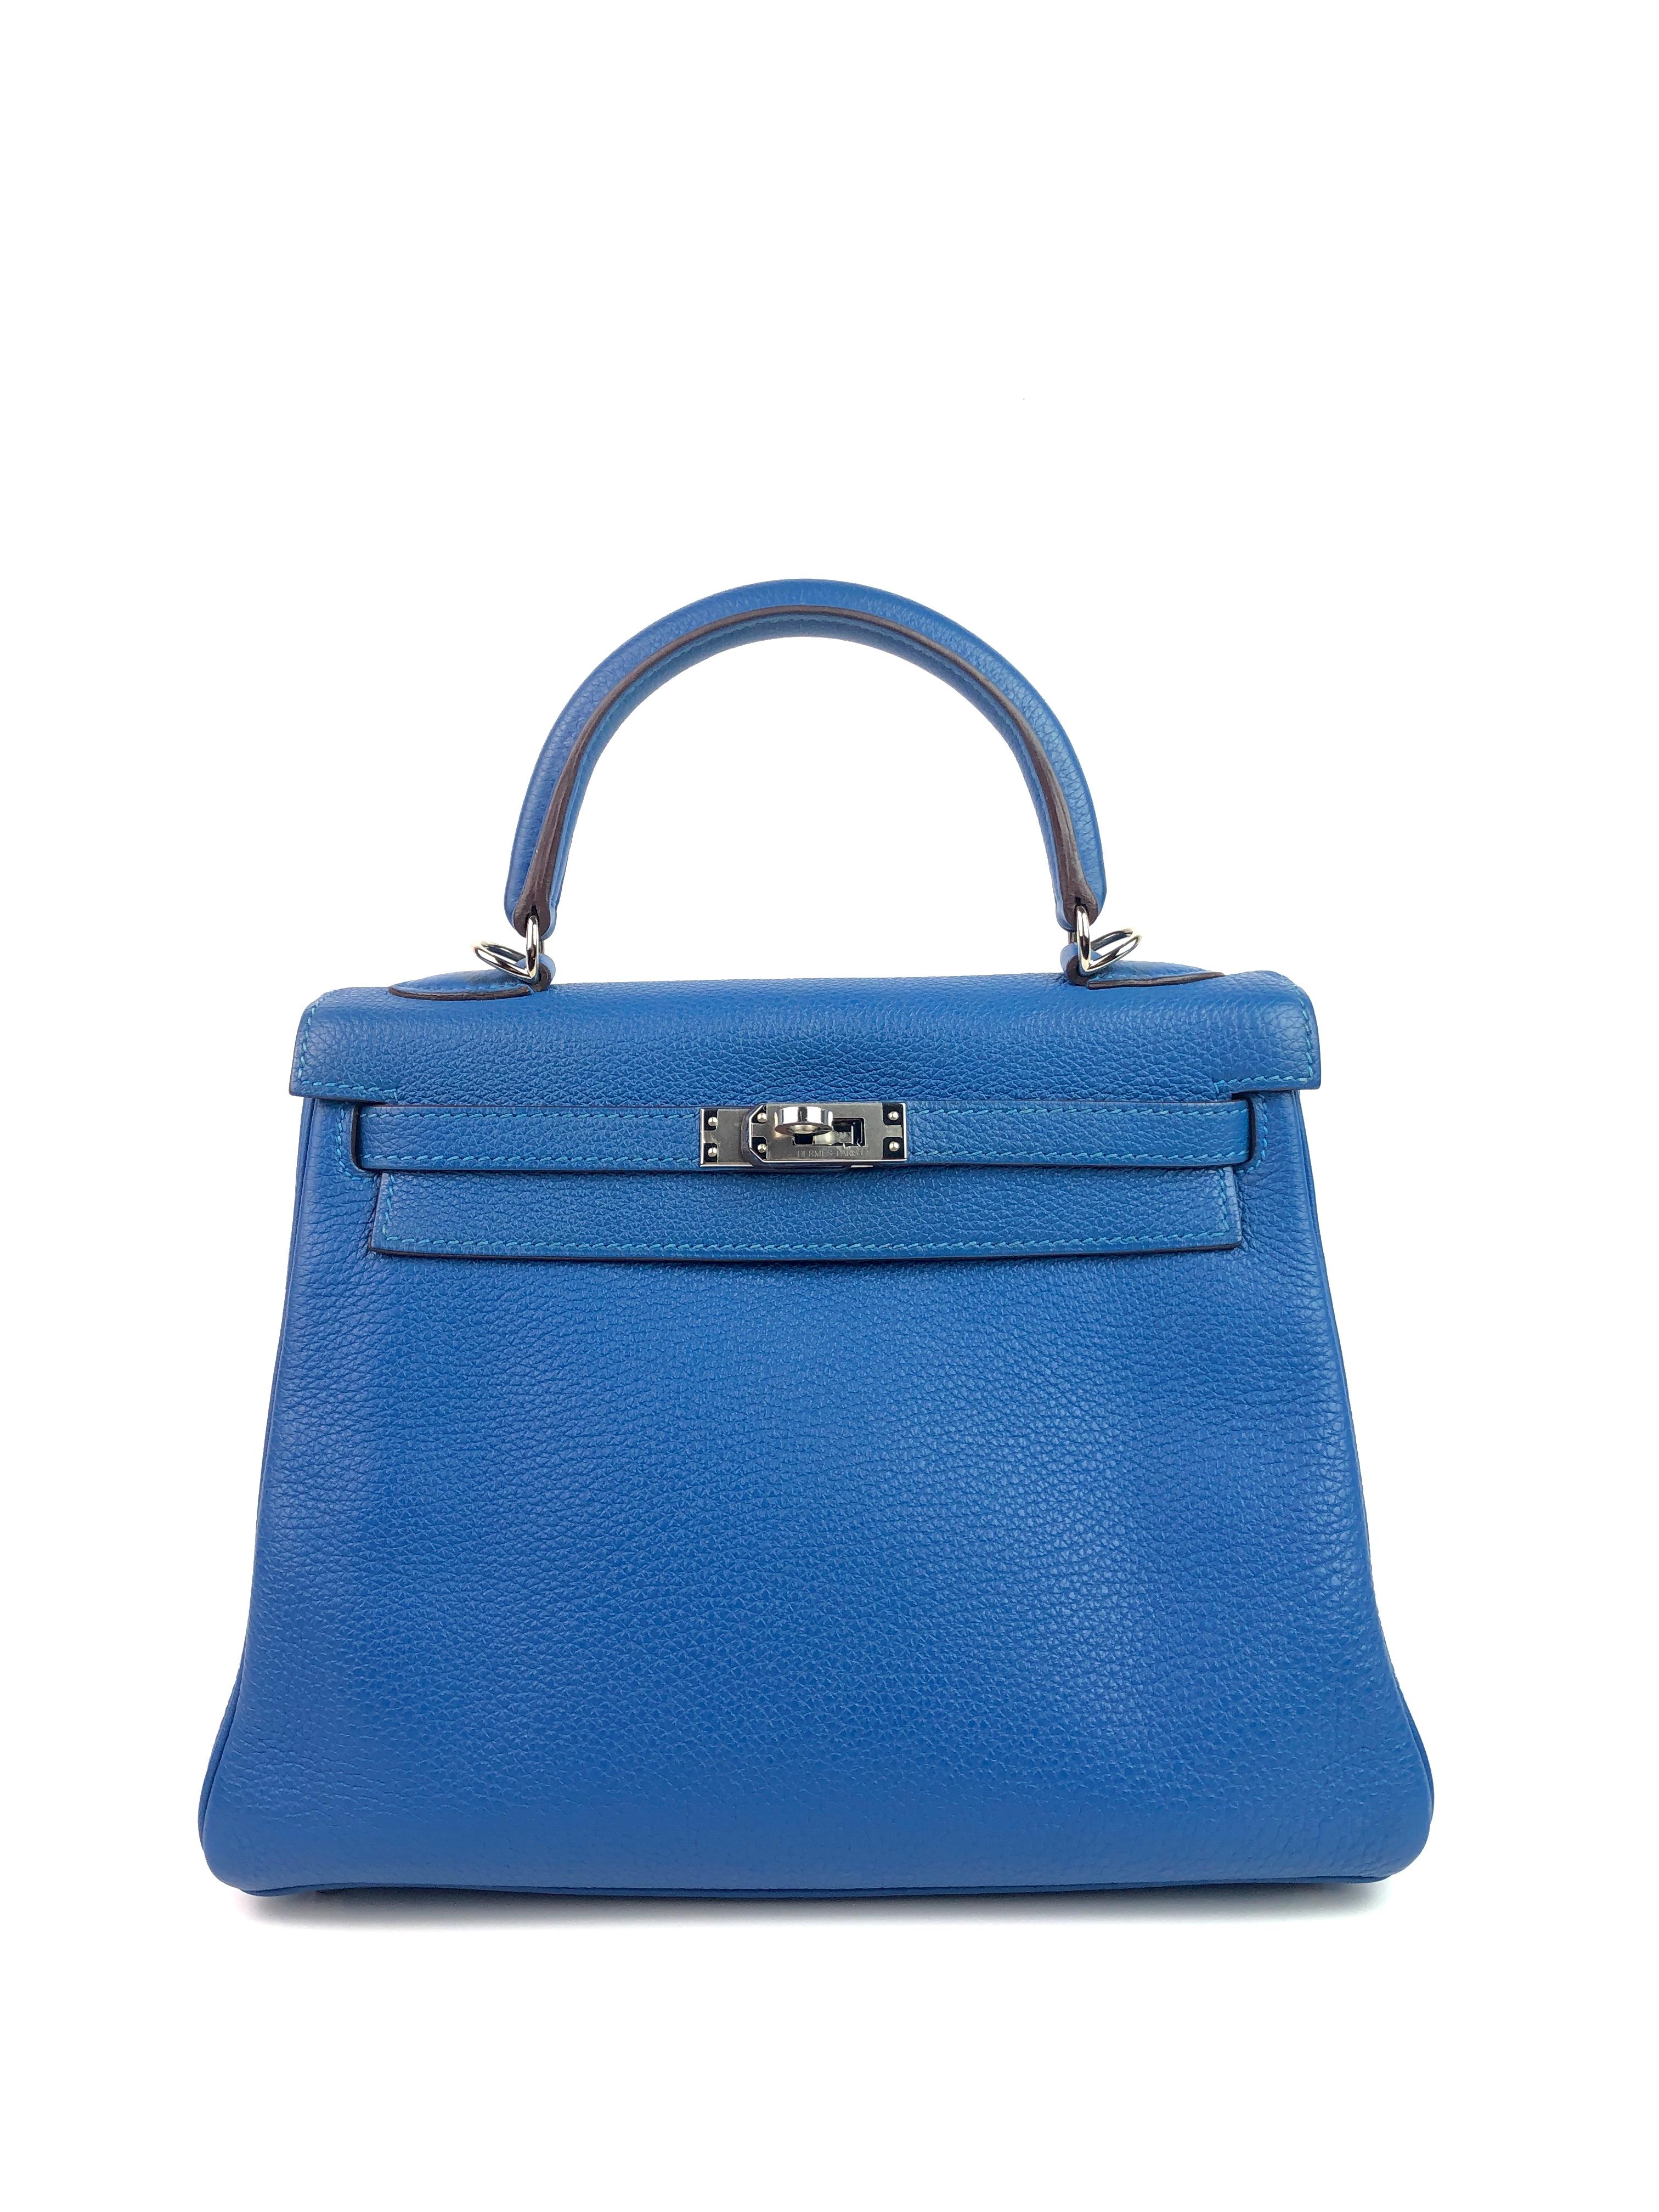 Hermes Kelly 25 Mykonos Blue Togo Palladium Hardware. Excellent Pristine Condition with Plastic on Hardware. Excellent corners and structure. 
Shop with Confidence from Lux Addicts. Authenticity Guaranteed!